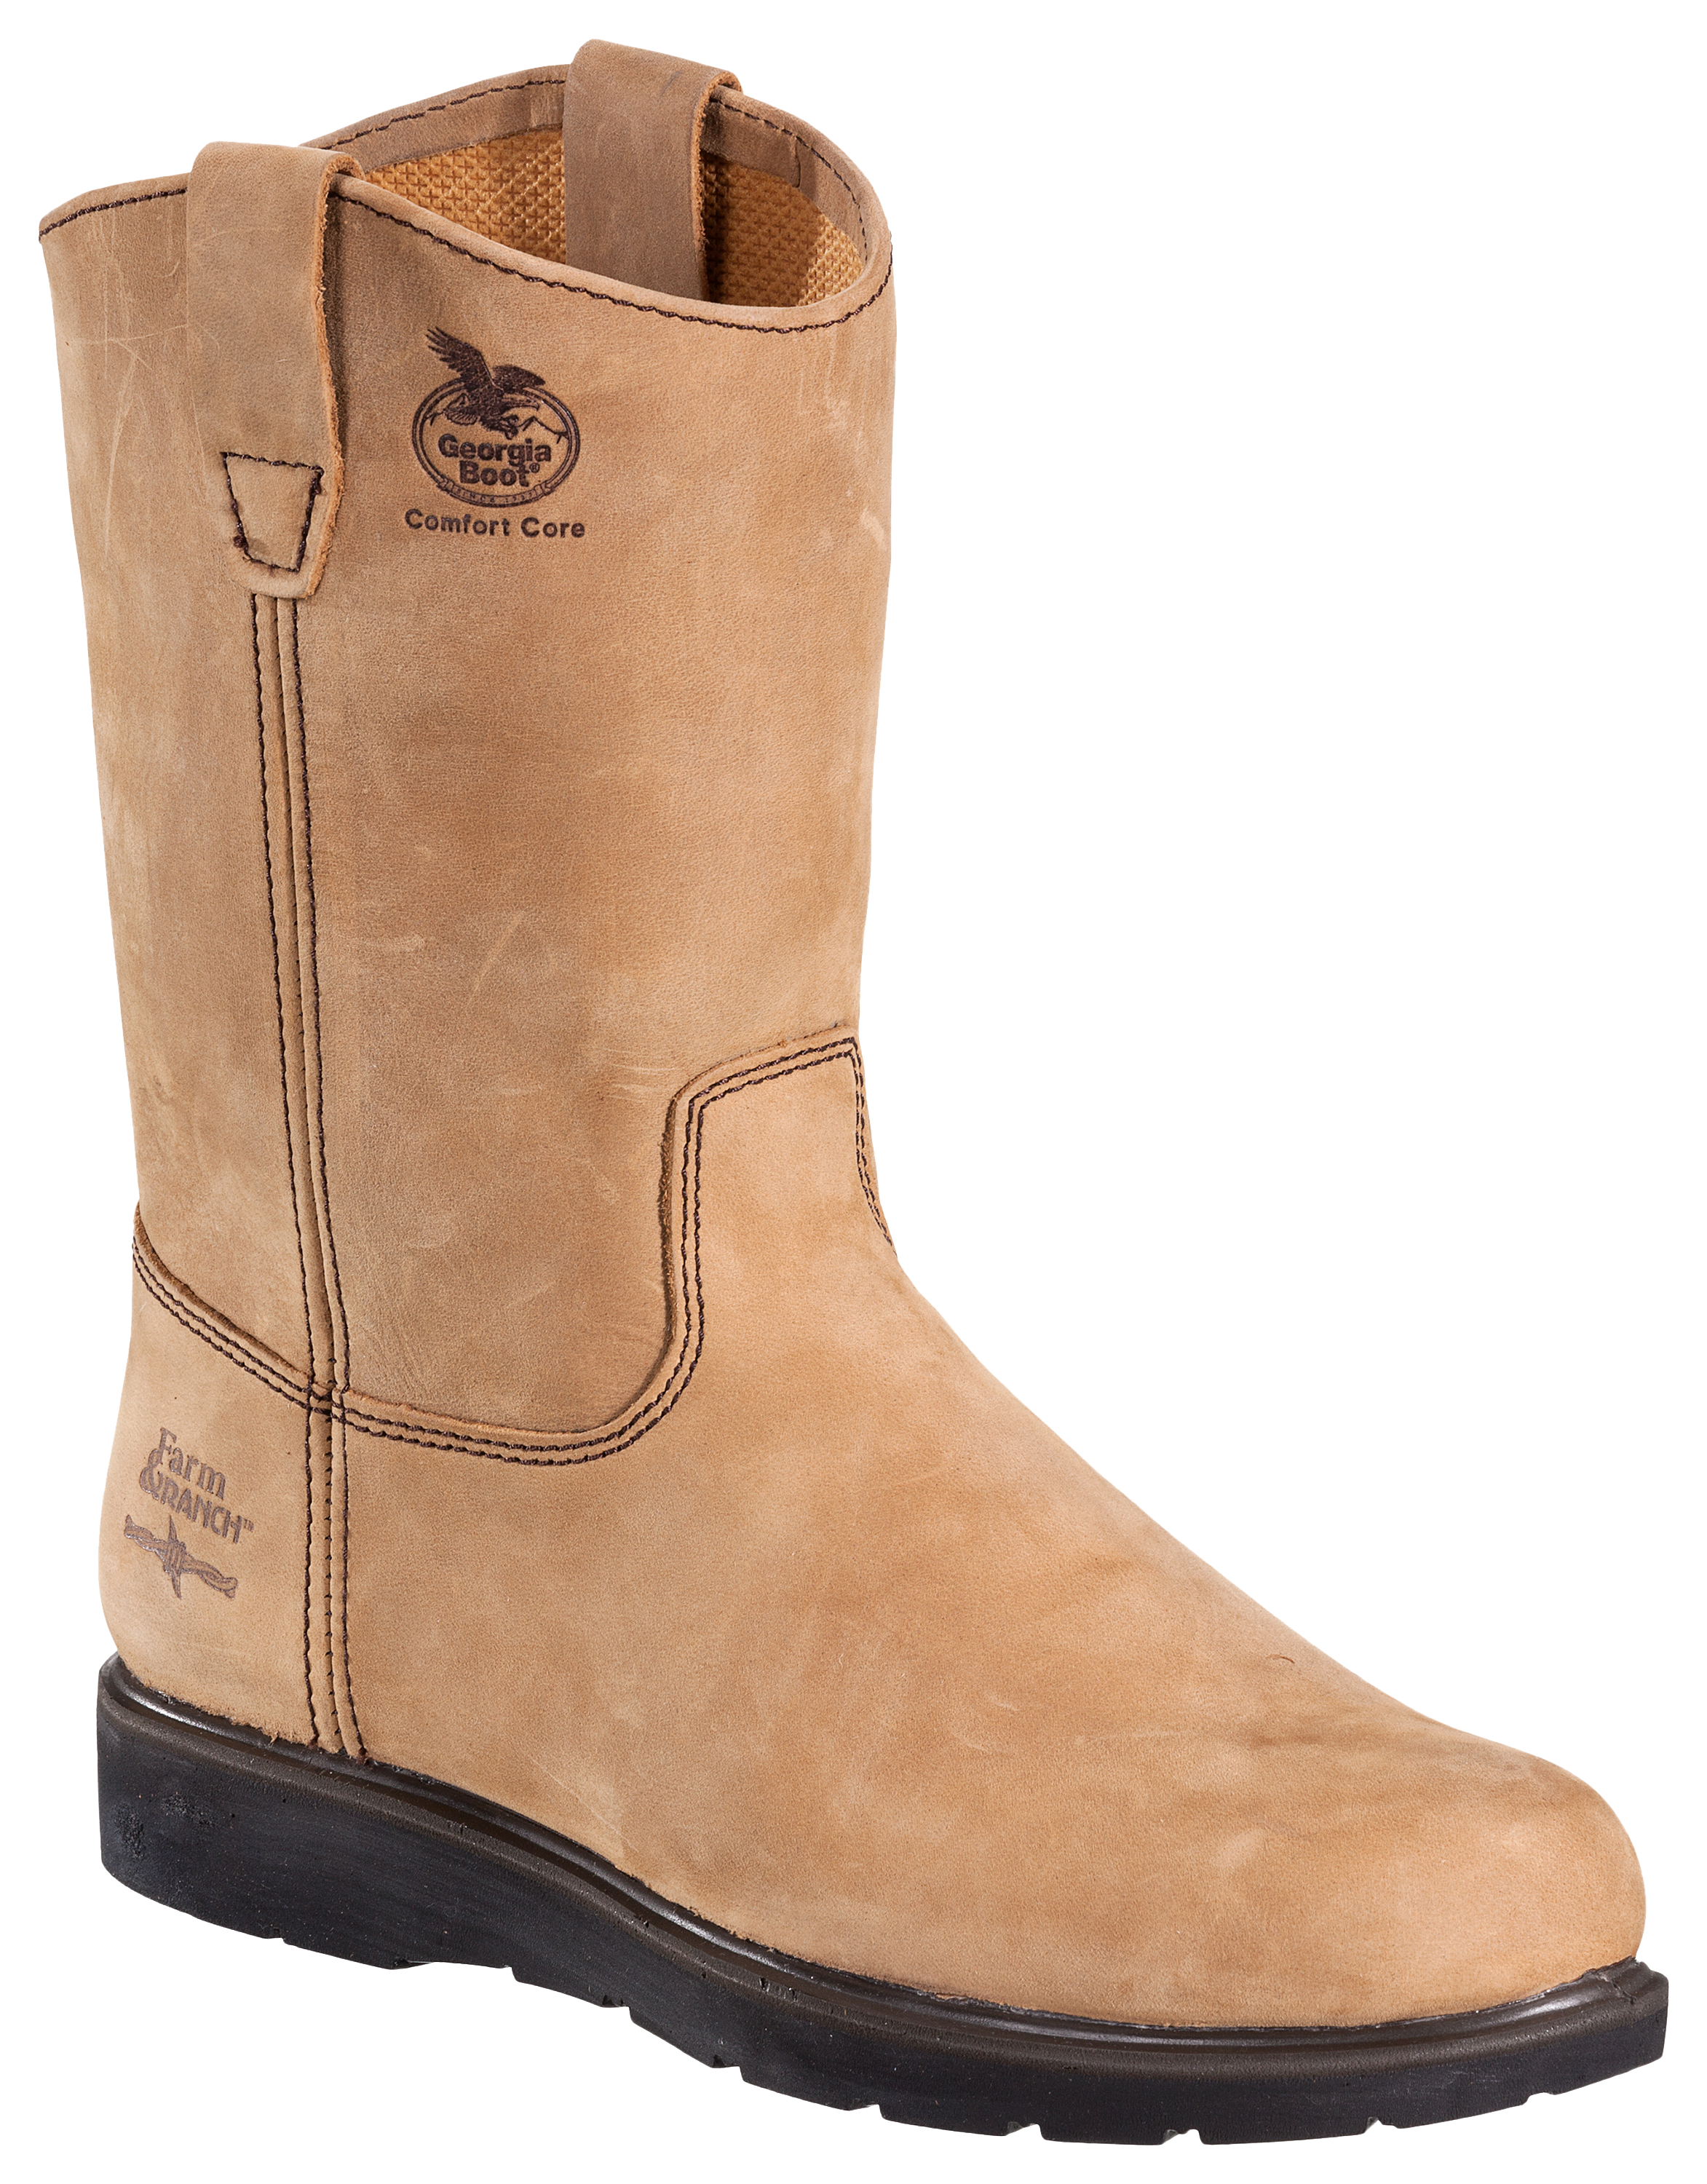 Georgia Boot Farm and Ranch Comfort Core Wellington Work Boots for Men